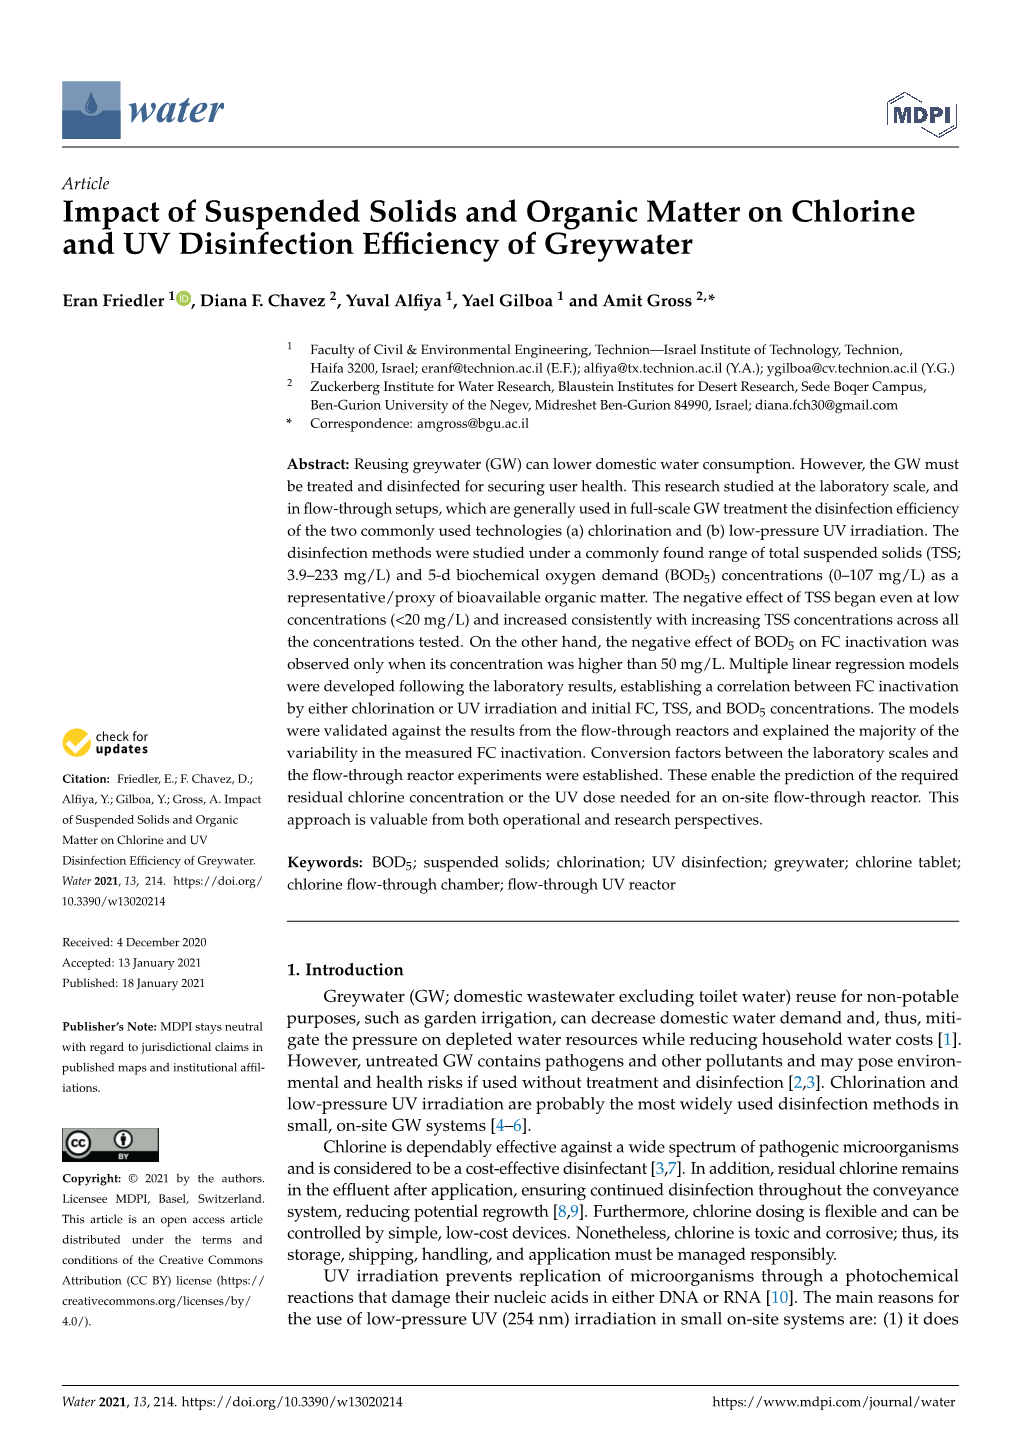 Impact of Suspended Solids and Organic Matter on Chlorine and UV Disinfection Efficiency of Greywater